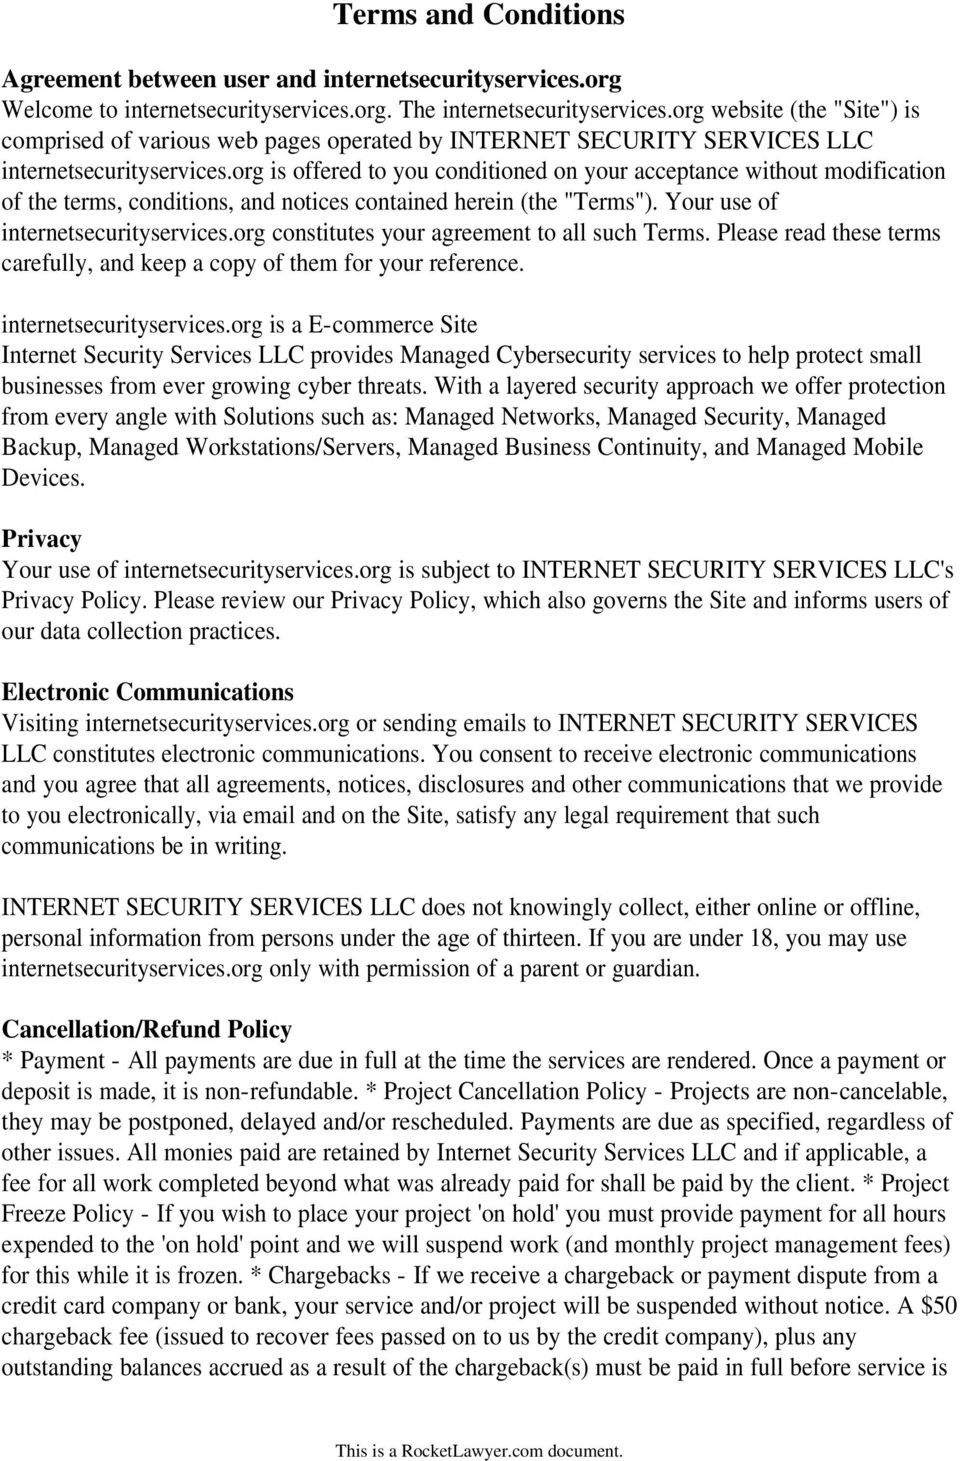 org is offered to you conditioned on your acceptance without modification of the terms, conditions, and notices contained herein (the "Terms"). Your use of internetsecurityservices.